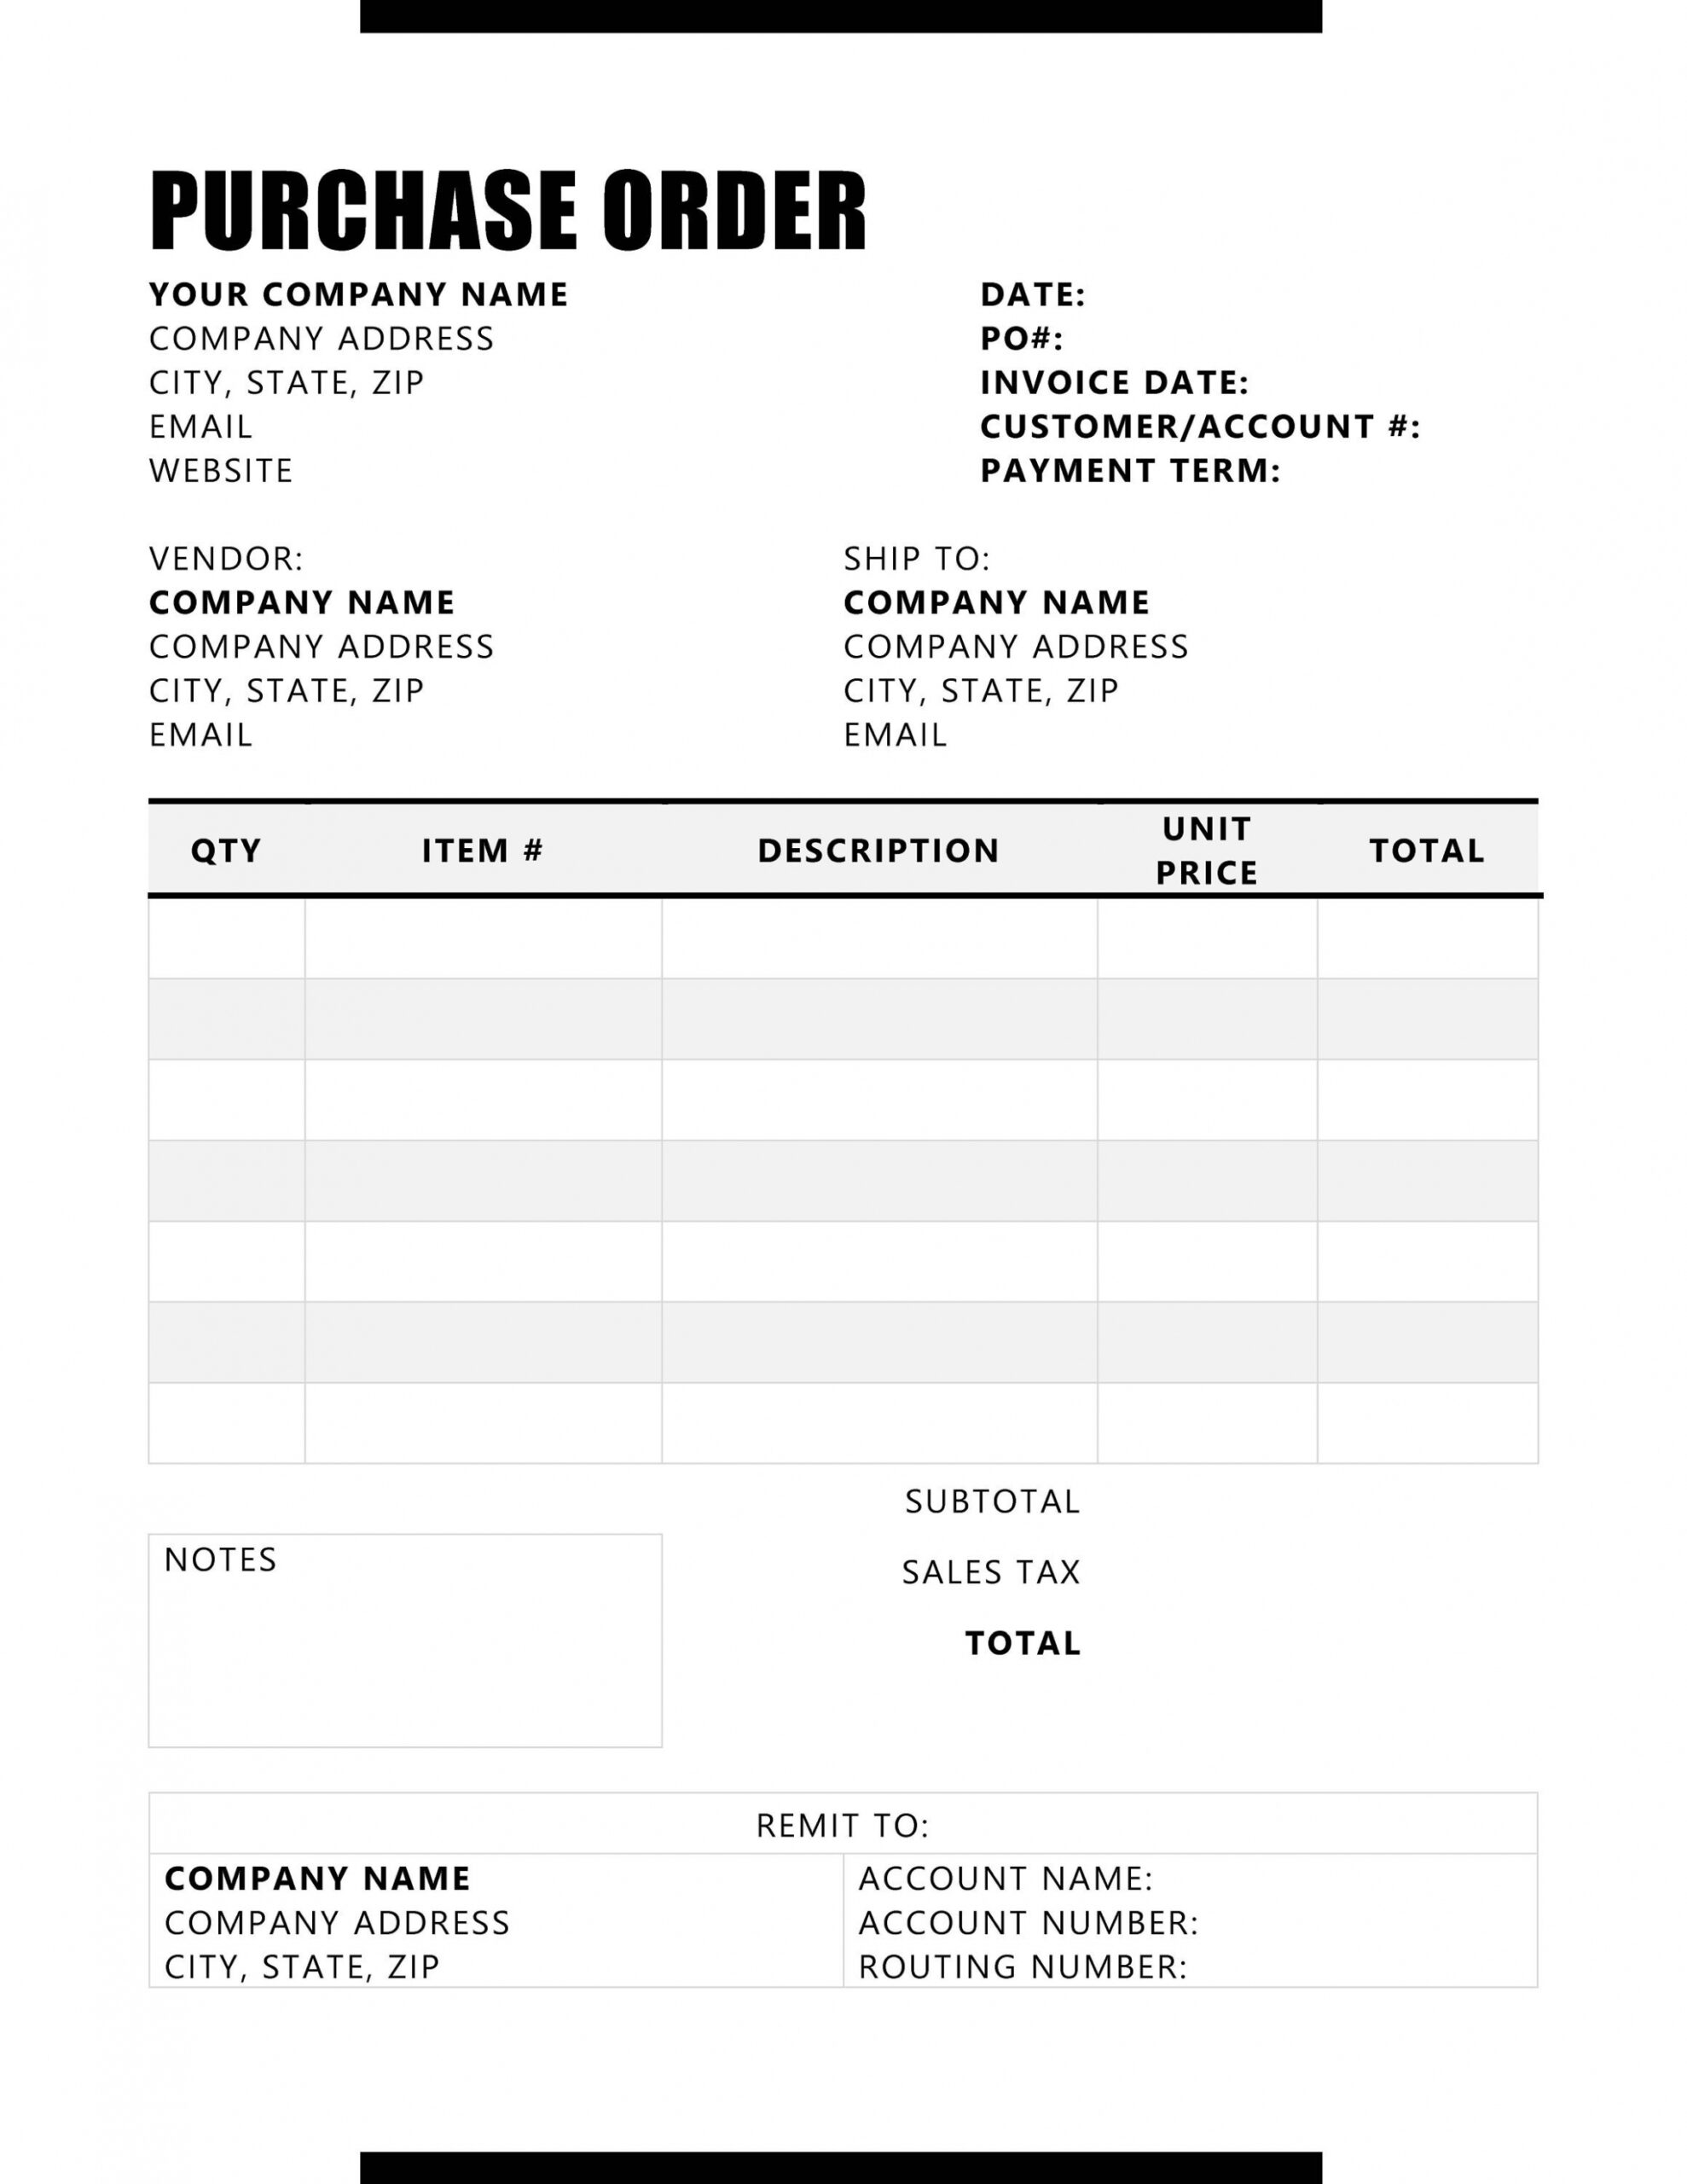 Printable Purchase Order Invoice Template CSV